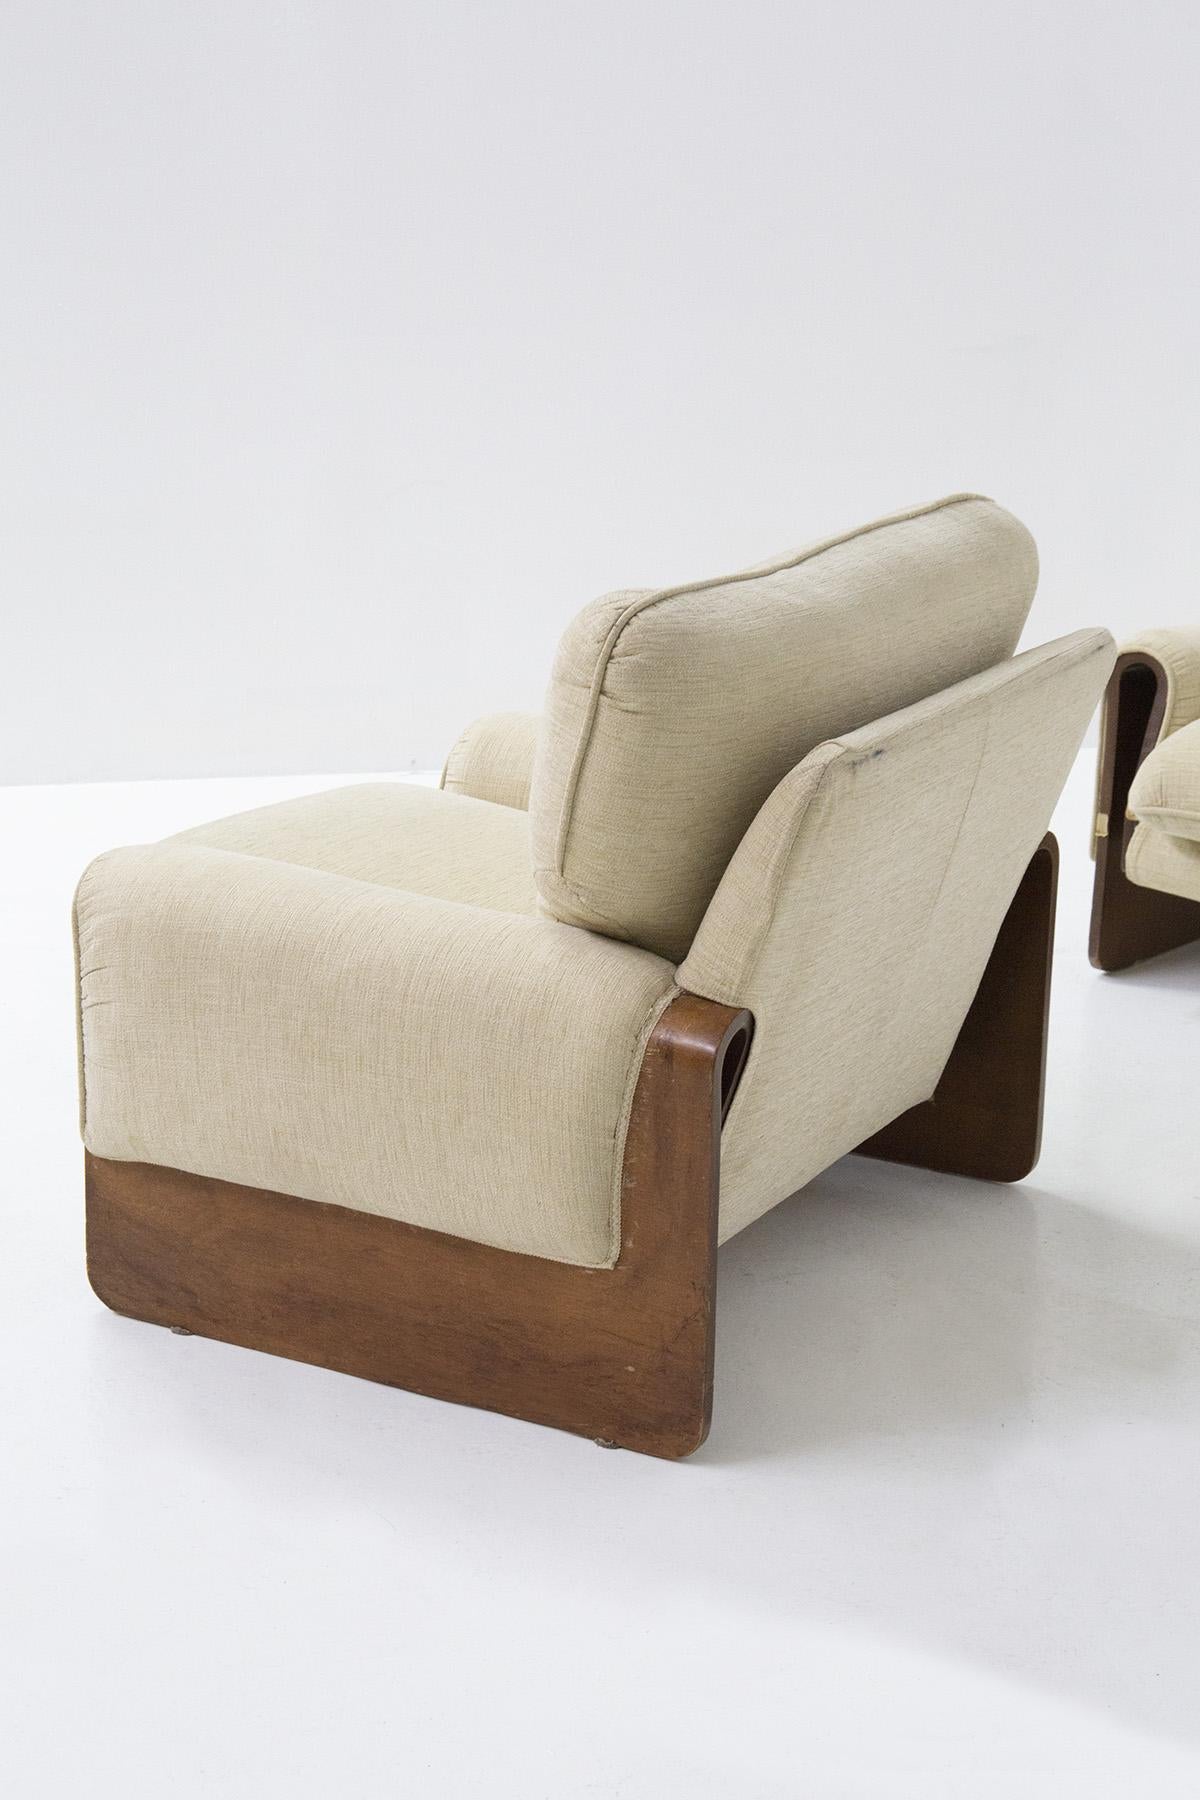 Rare pair of Italian armchairs designed by architect Ferdinando Buzzi from the 1970s for the Ferruccio Brunati manufacture. It denotes the great mastery of wood, in fact The frame is made of curved walnut wood .
Inside the curved wooden arms we